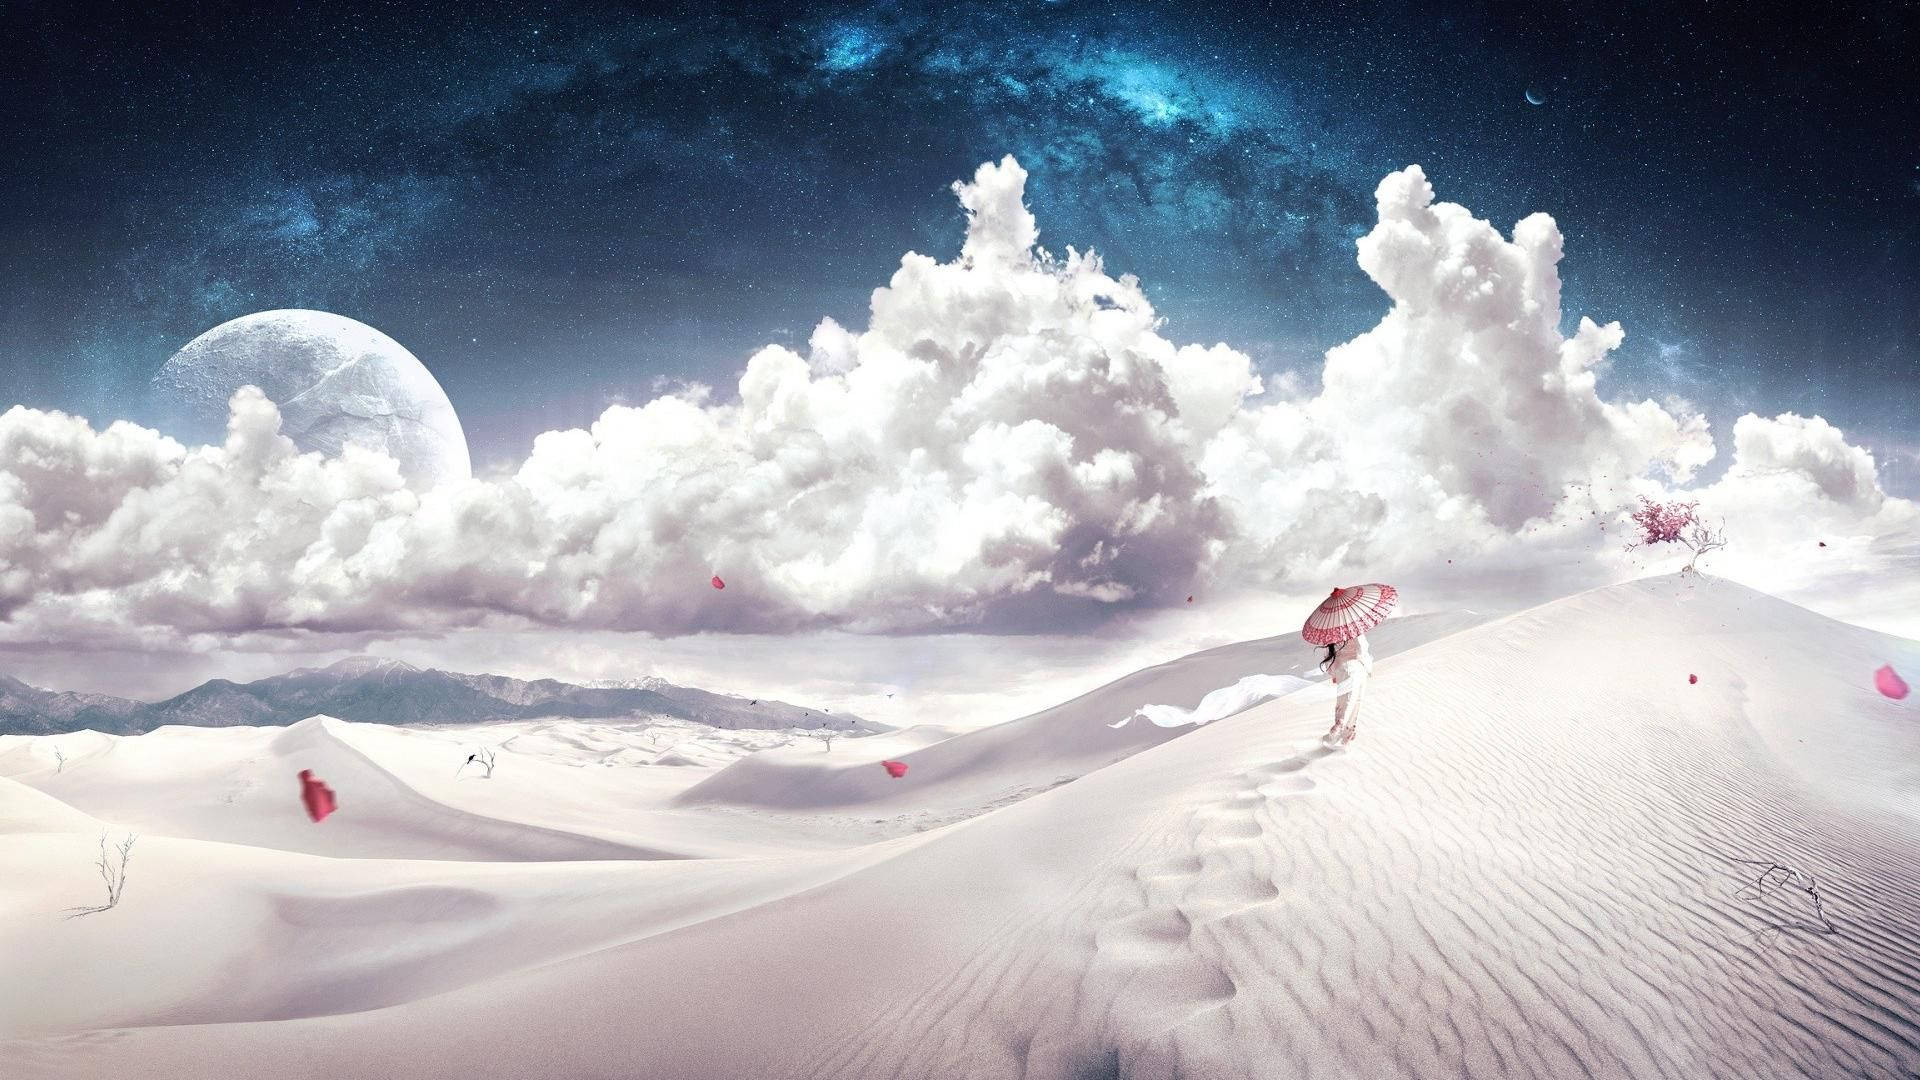 Heaven 1920X1080 Wallpaper and Background Image